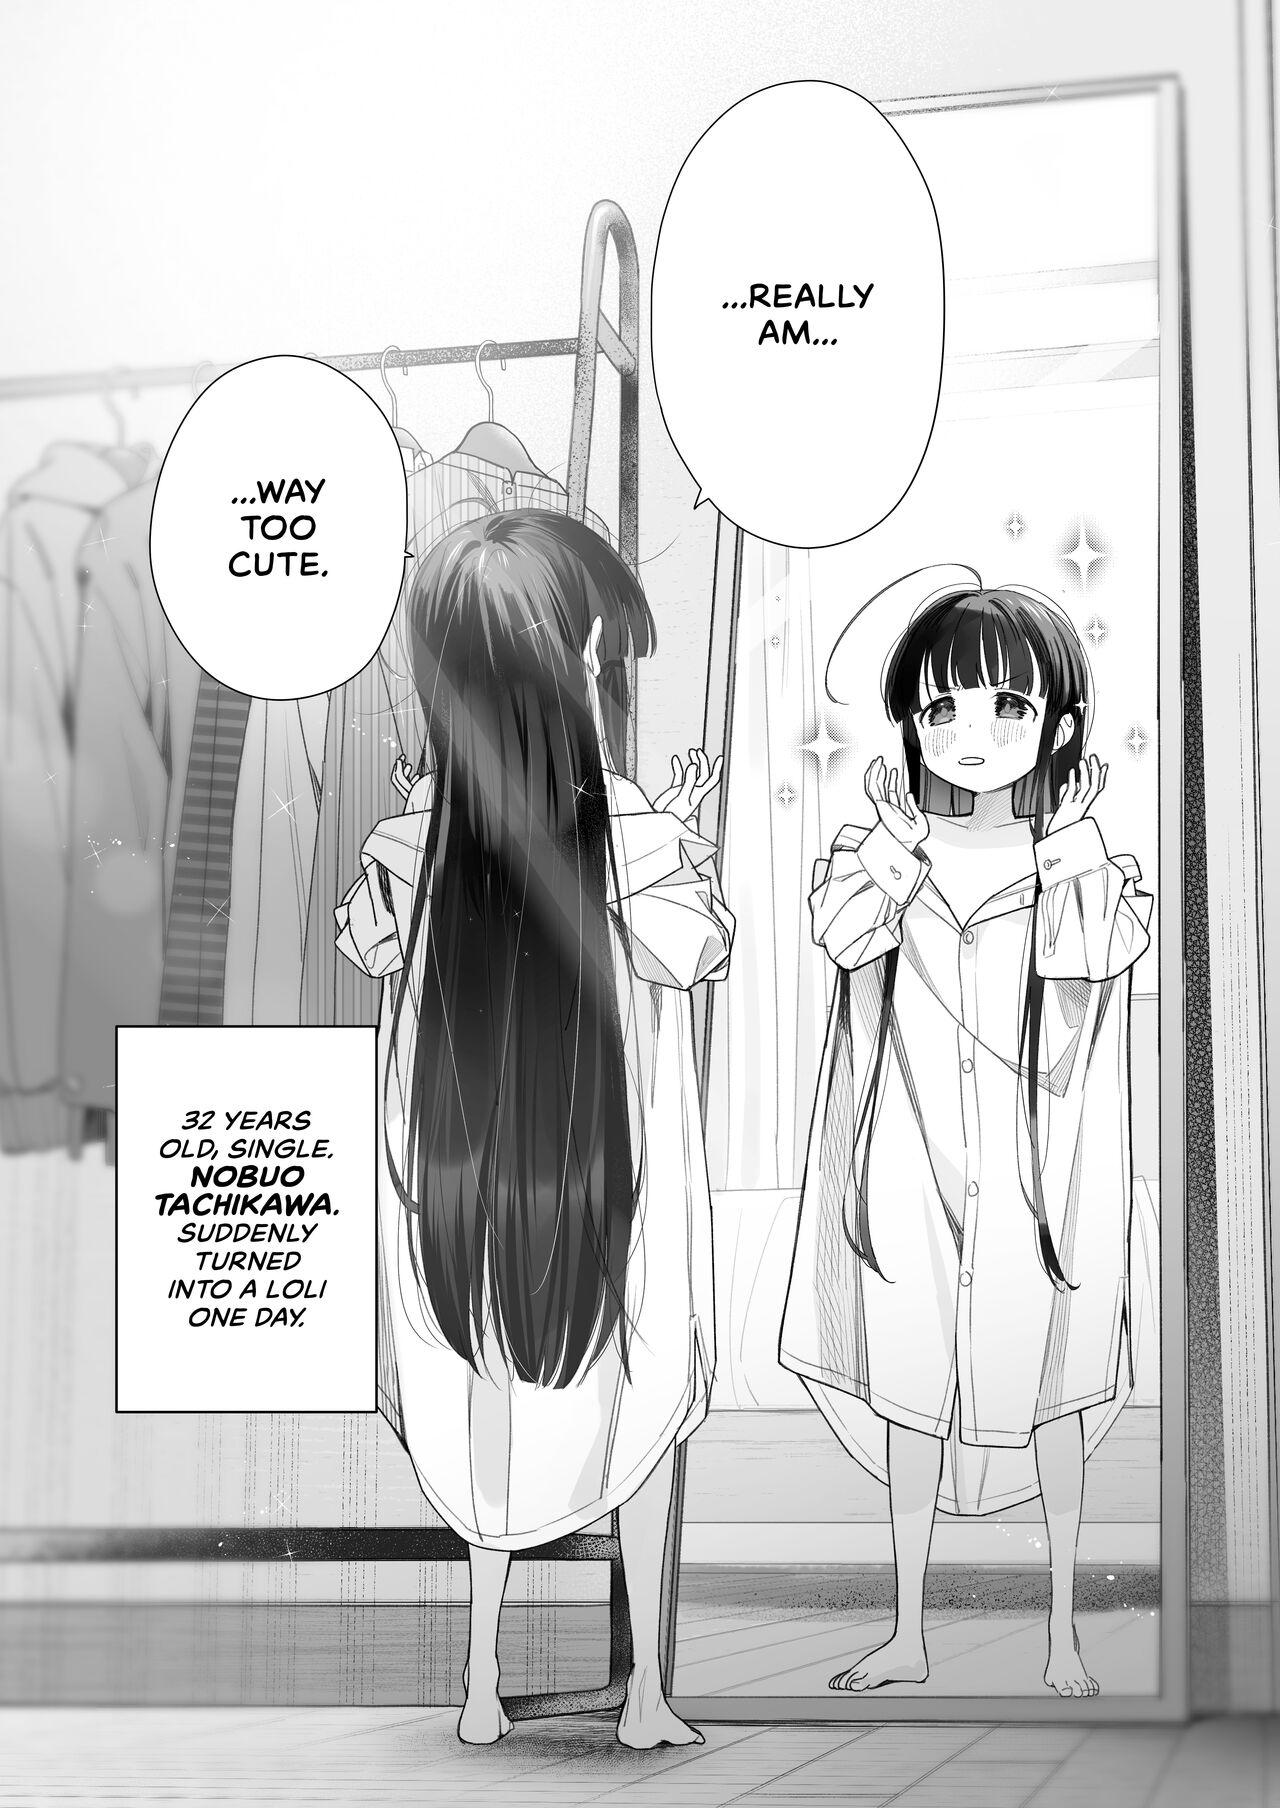 Slut Porn [Asunaro Neat. (Ronna)] TS Loli Oji-san no Bouken Onanie Hen | The Adventures of an Old Man Who Was Gender-Swapped Into a Loli ~Masturbation Chapter~ [English] [CulturedCommissions] [Digital] - Original Whooty - Page 3